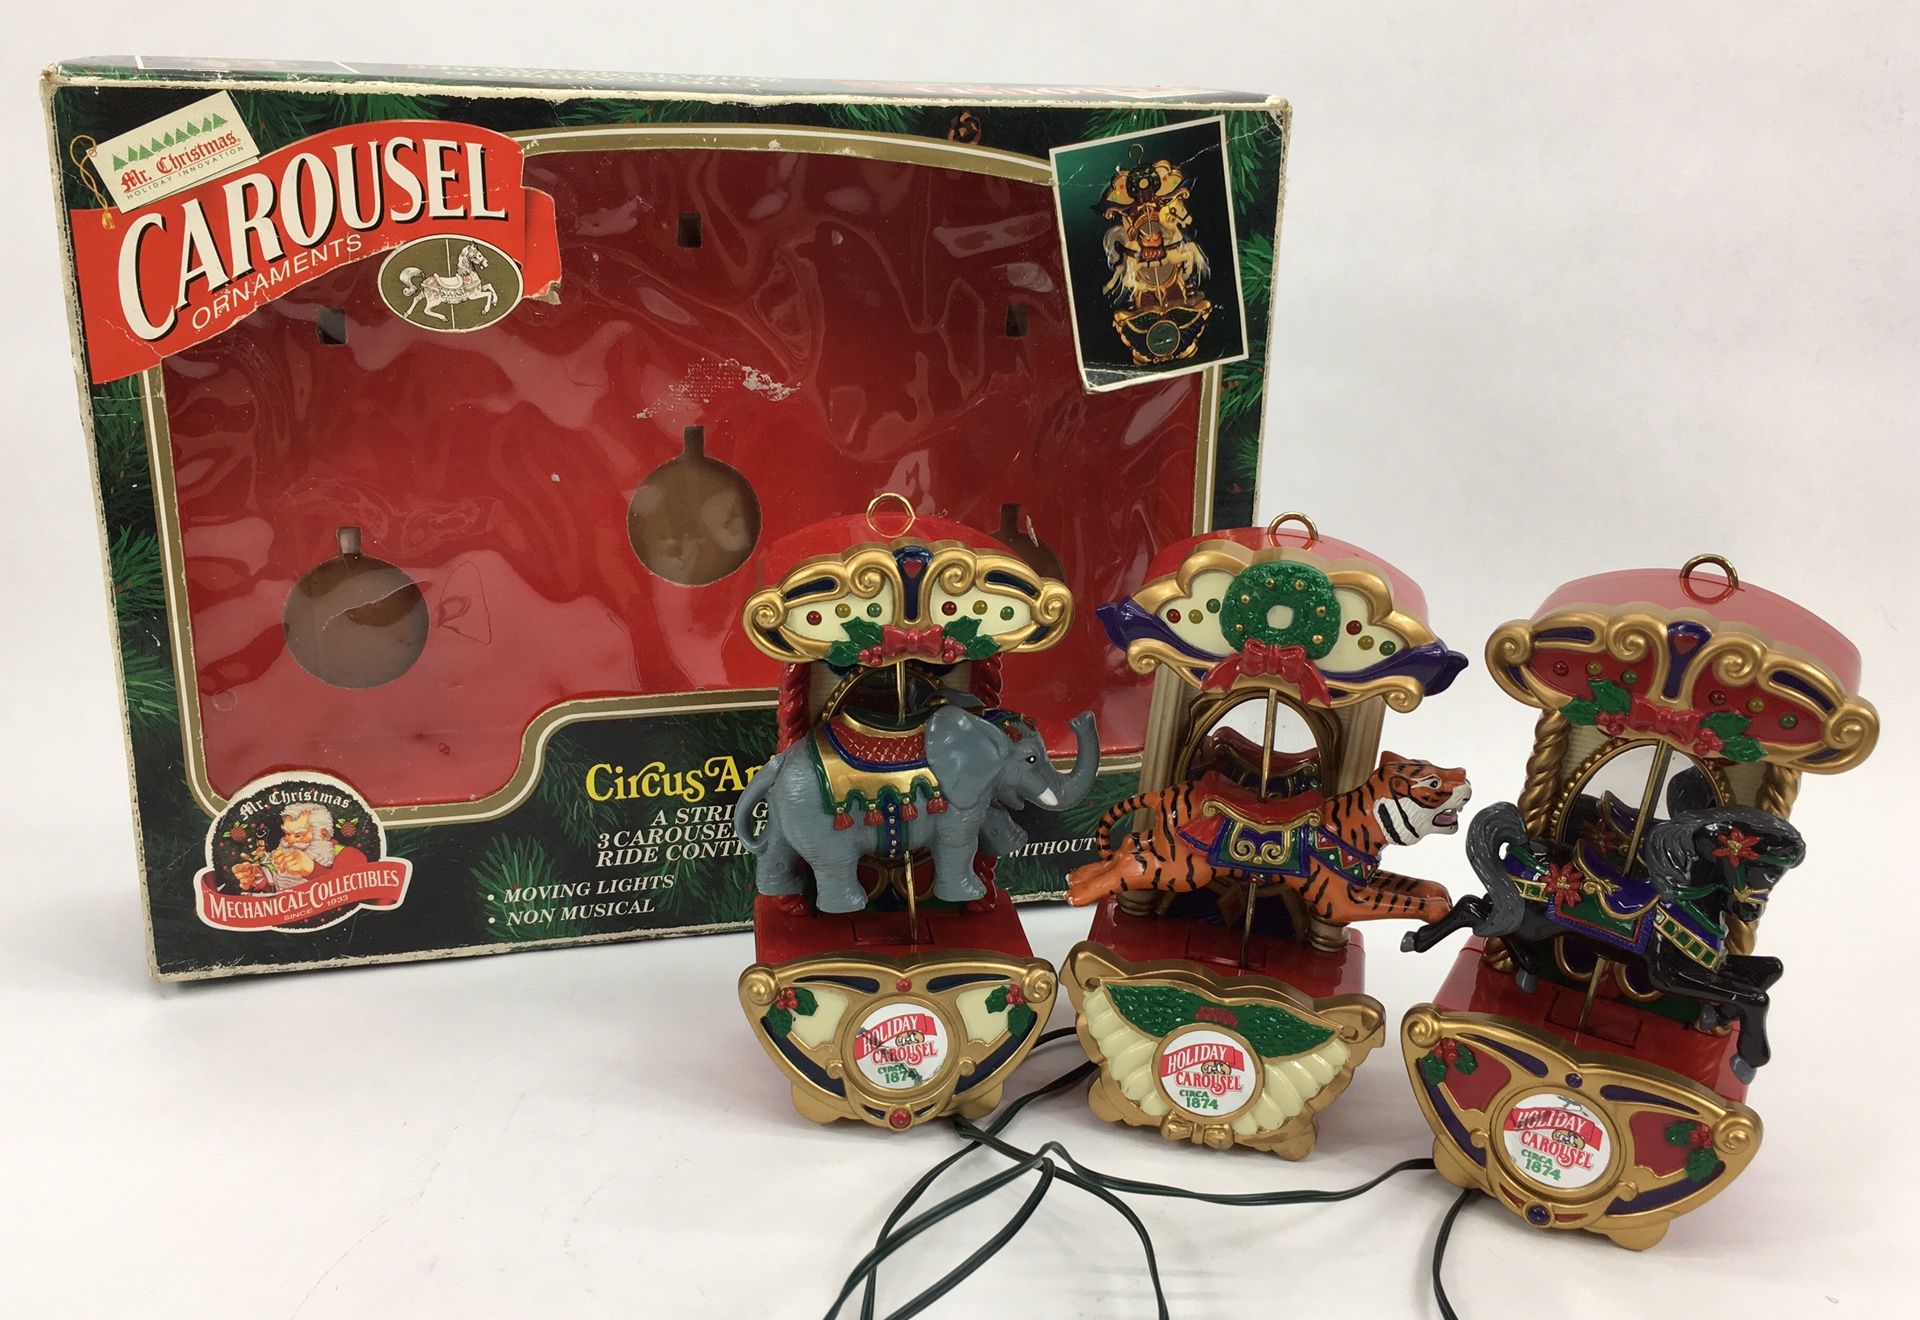 7” Vintage 1993 Mr. Christmas Circus Animals Carousel Ornaments (Complete!)